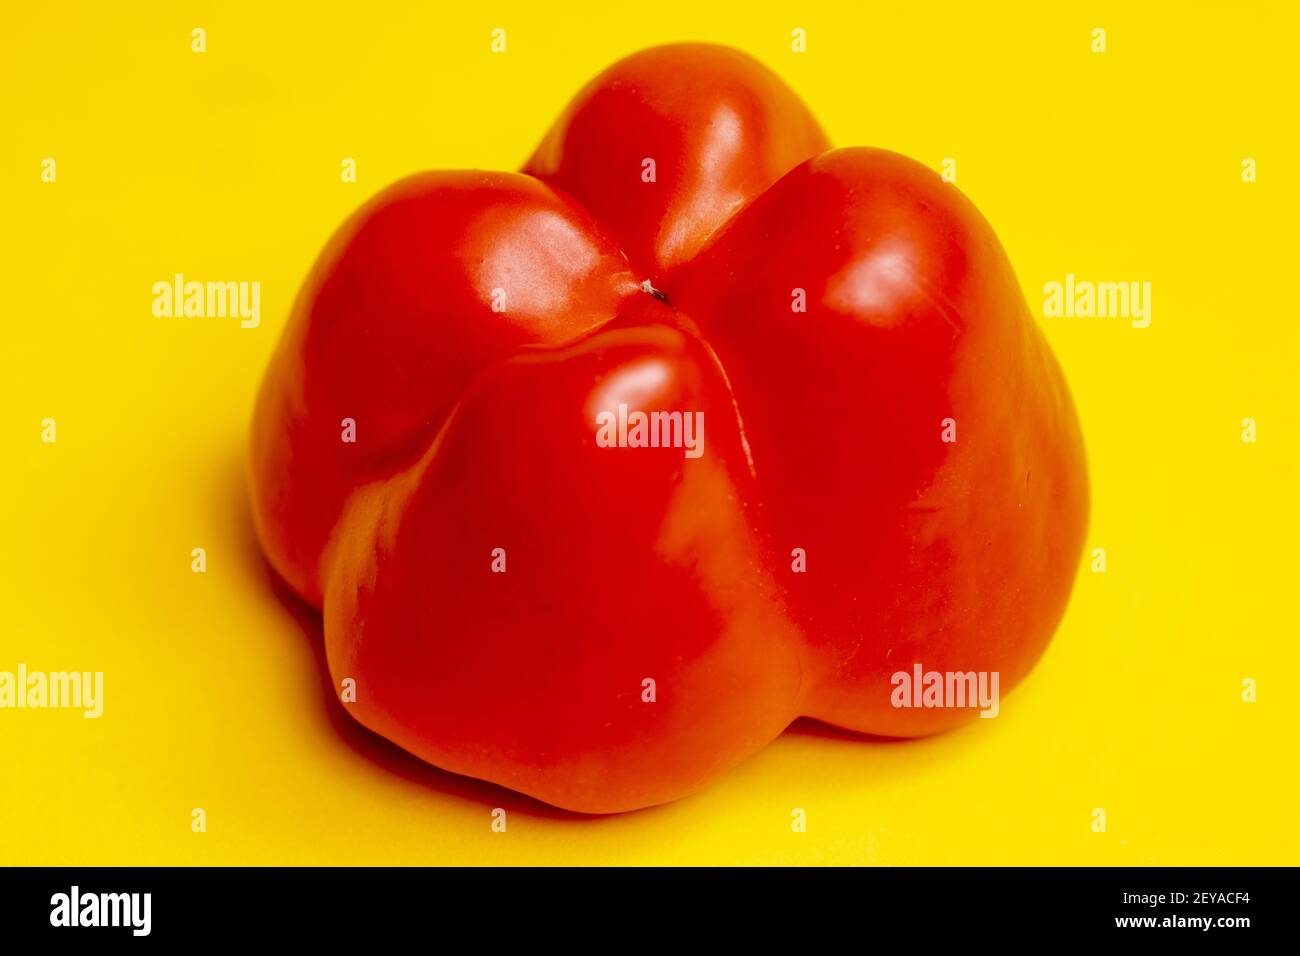 Upside-down vibrant red colorful pepper or paprika resembling a reflective pudding starkly contrasting with the yellow surface below. Stock Photo